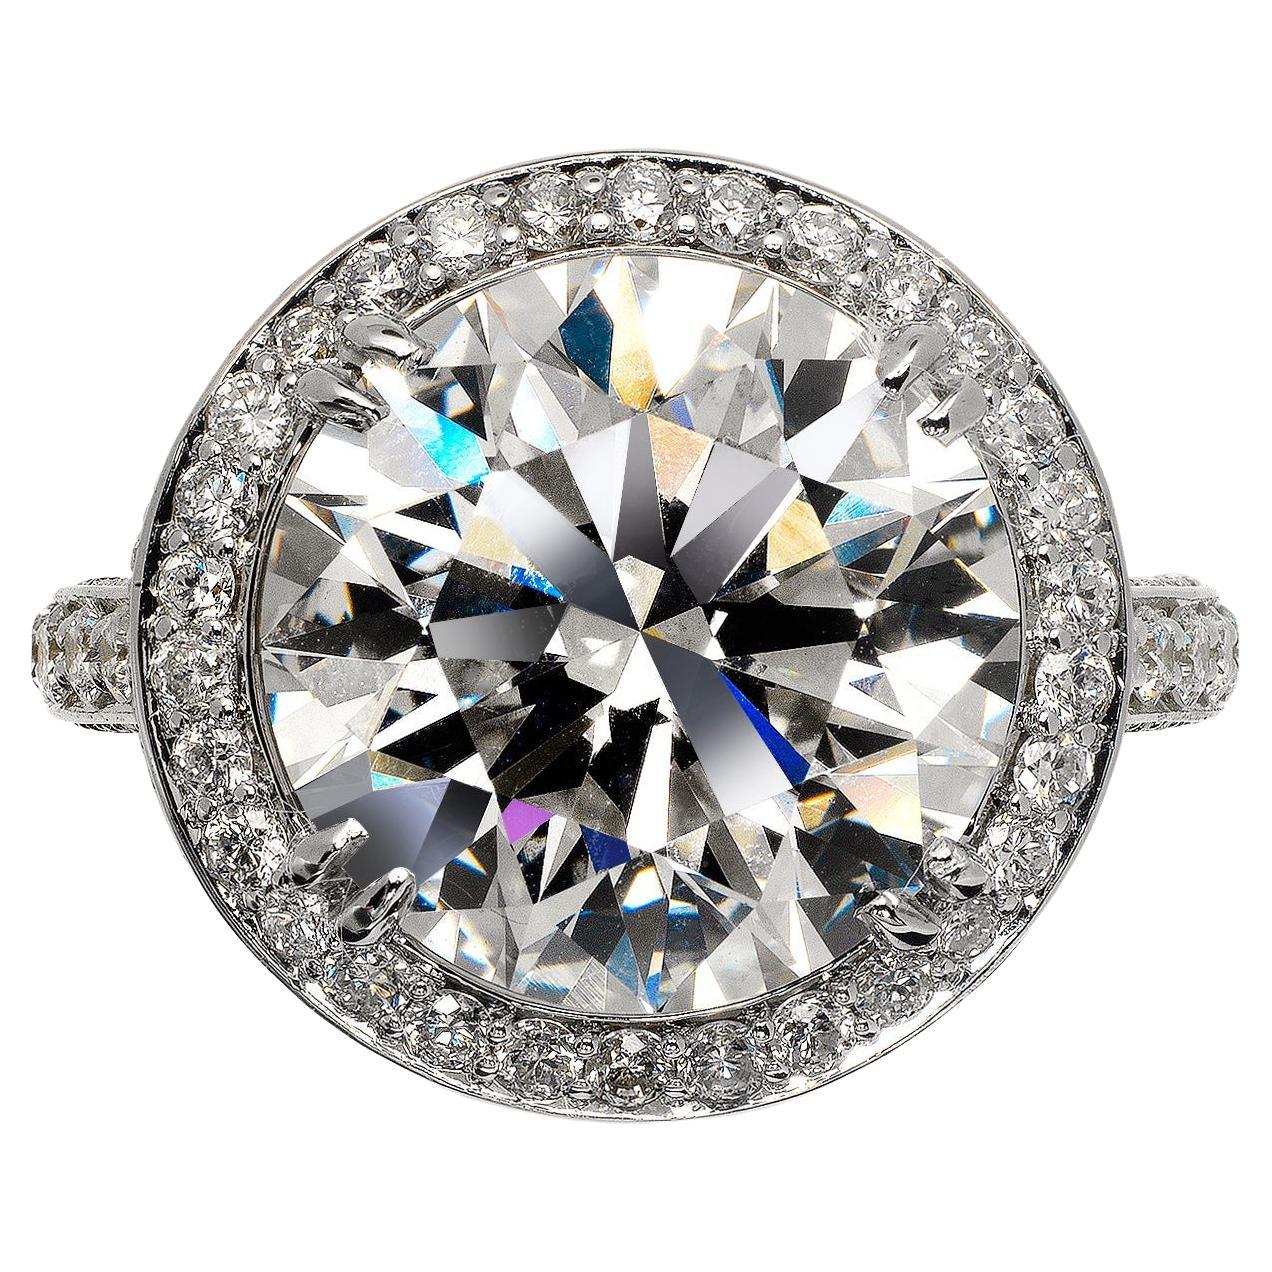 7 Carat Round Cut Diamond Engagement Ring GIA Certified F VVS2 For Sale